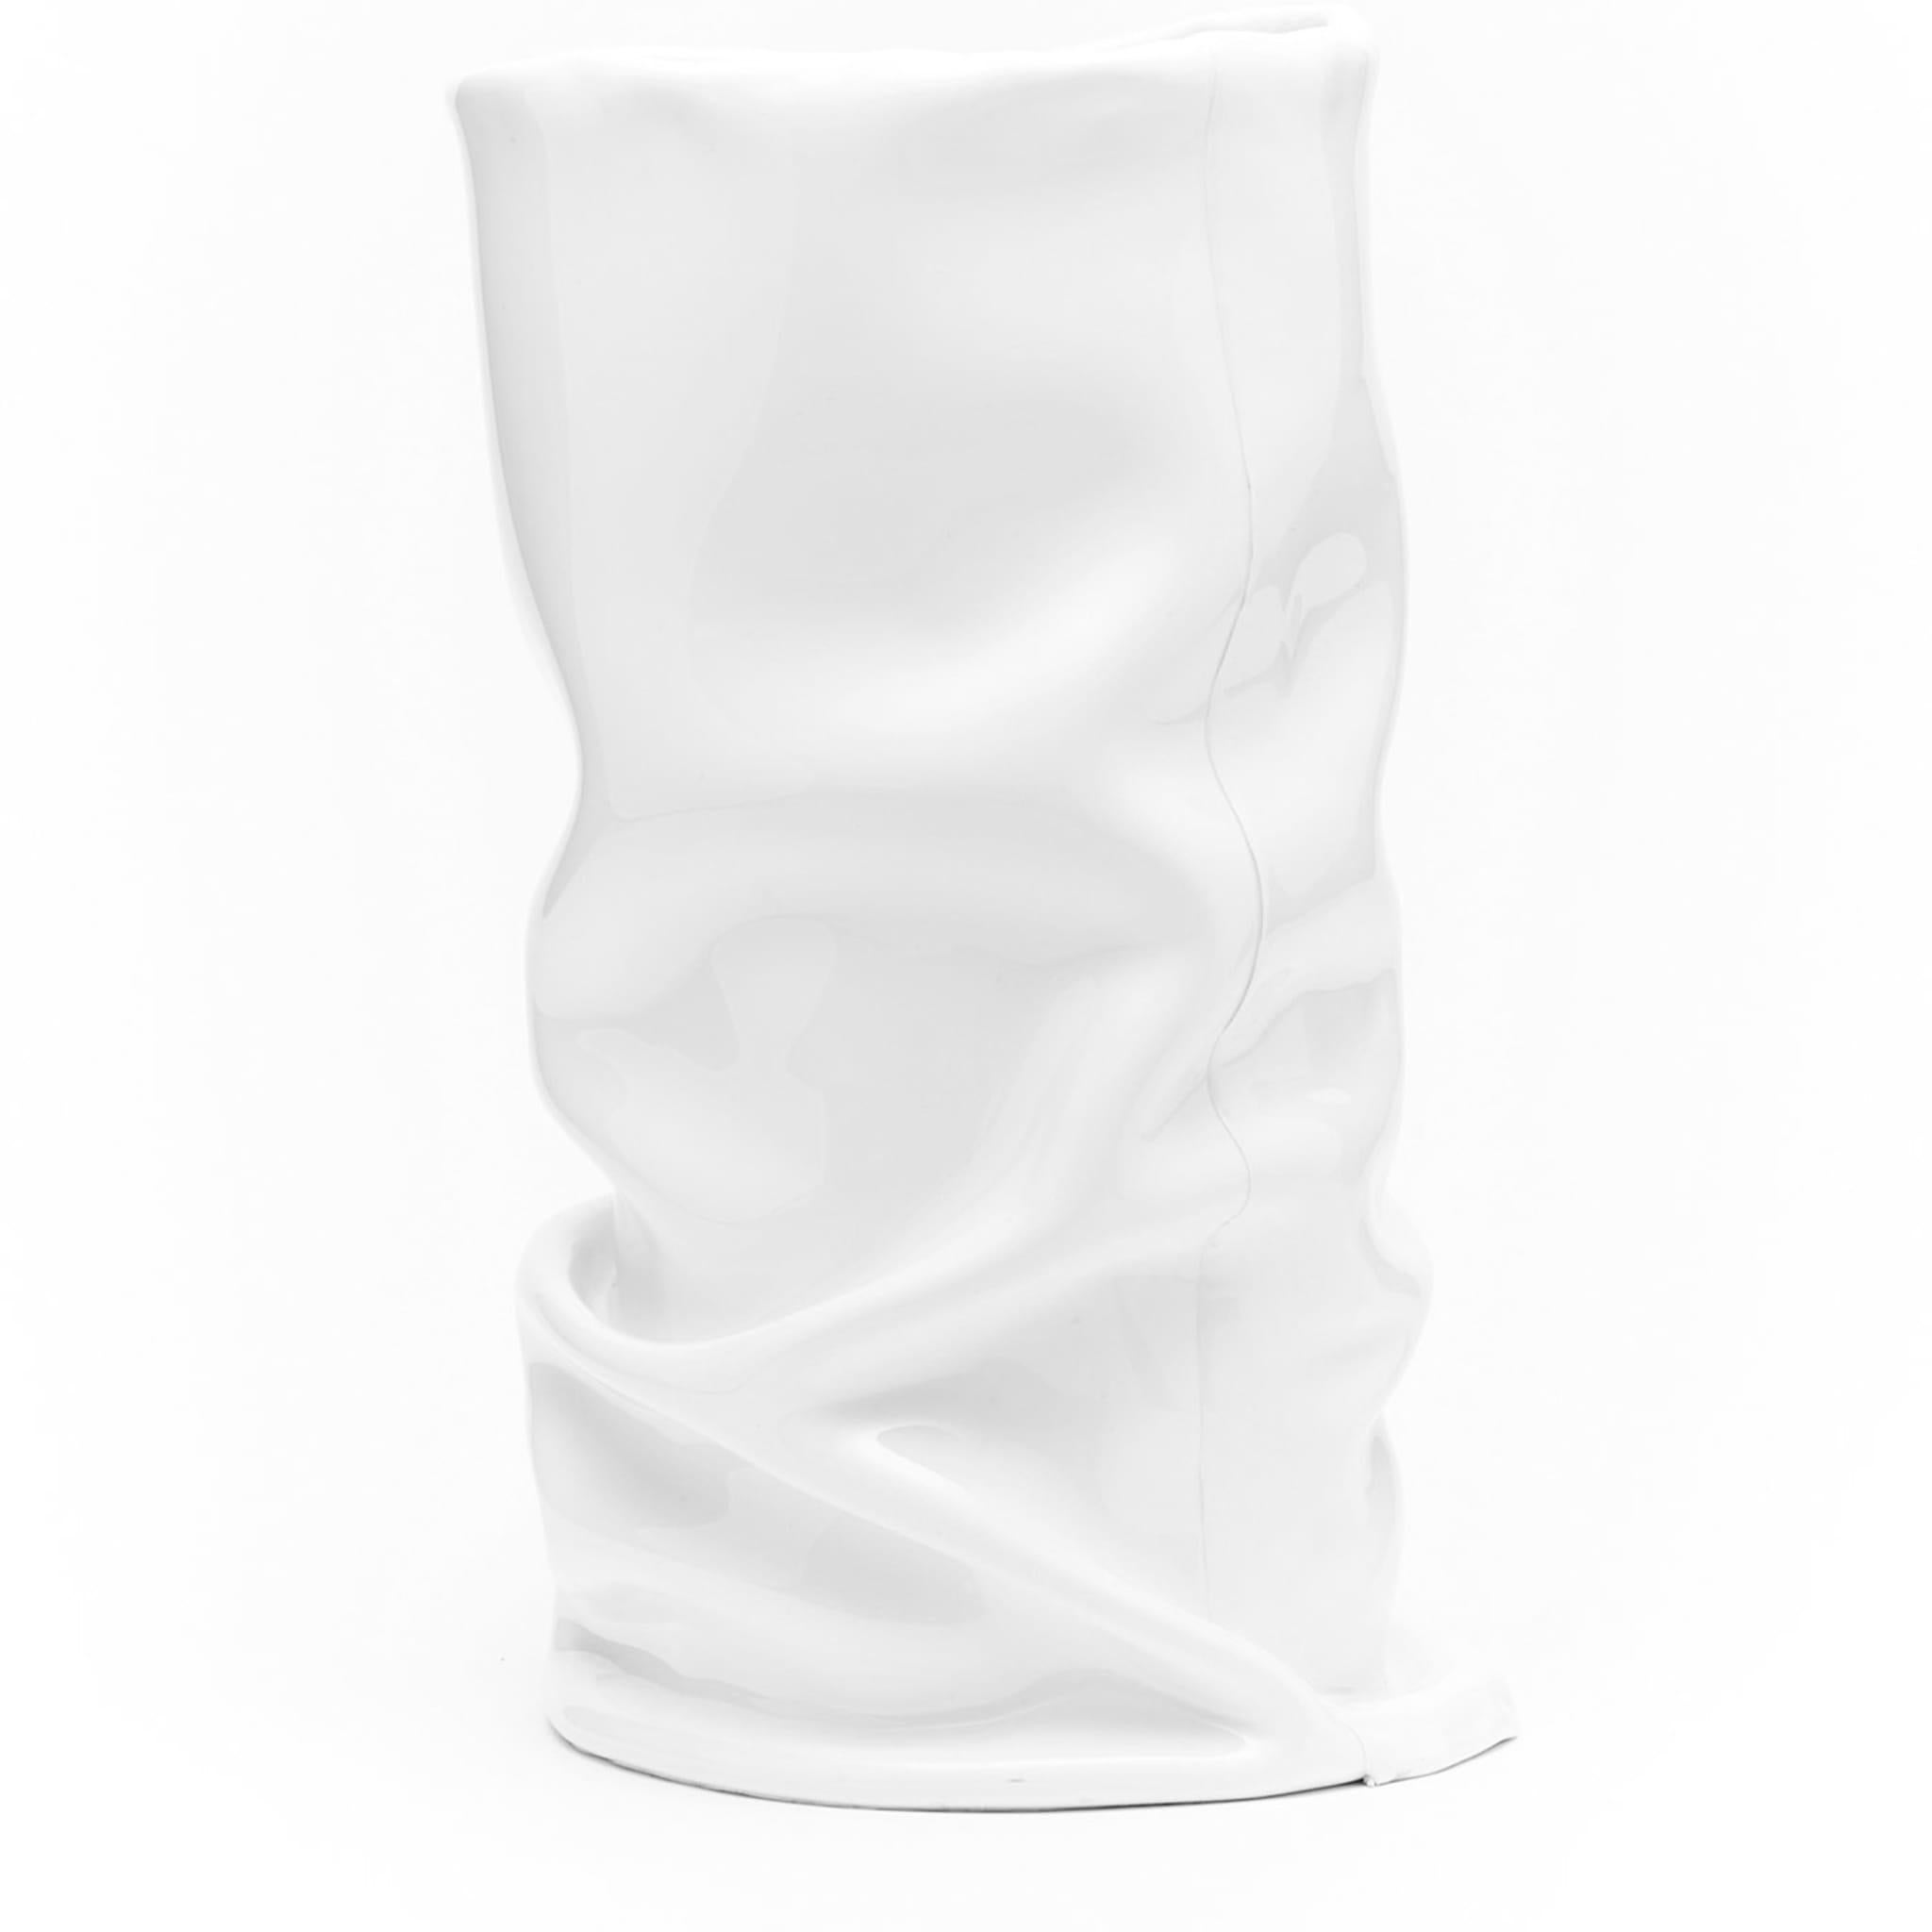 Here showcased in a glossy total-white look of striking luminosity, this resin vase belongs to a series of handcrafted pieces distinguished by a flounced design inspired by Ancient Greek-Roman garments. Its irregular curves and unadorned aesthetic